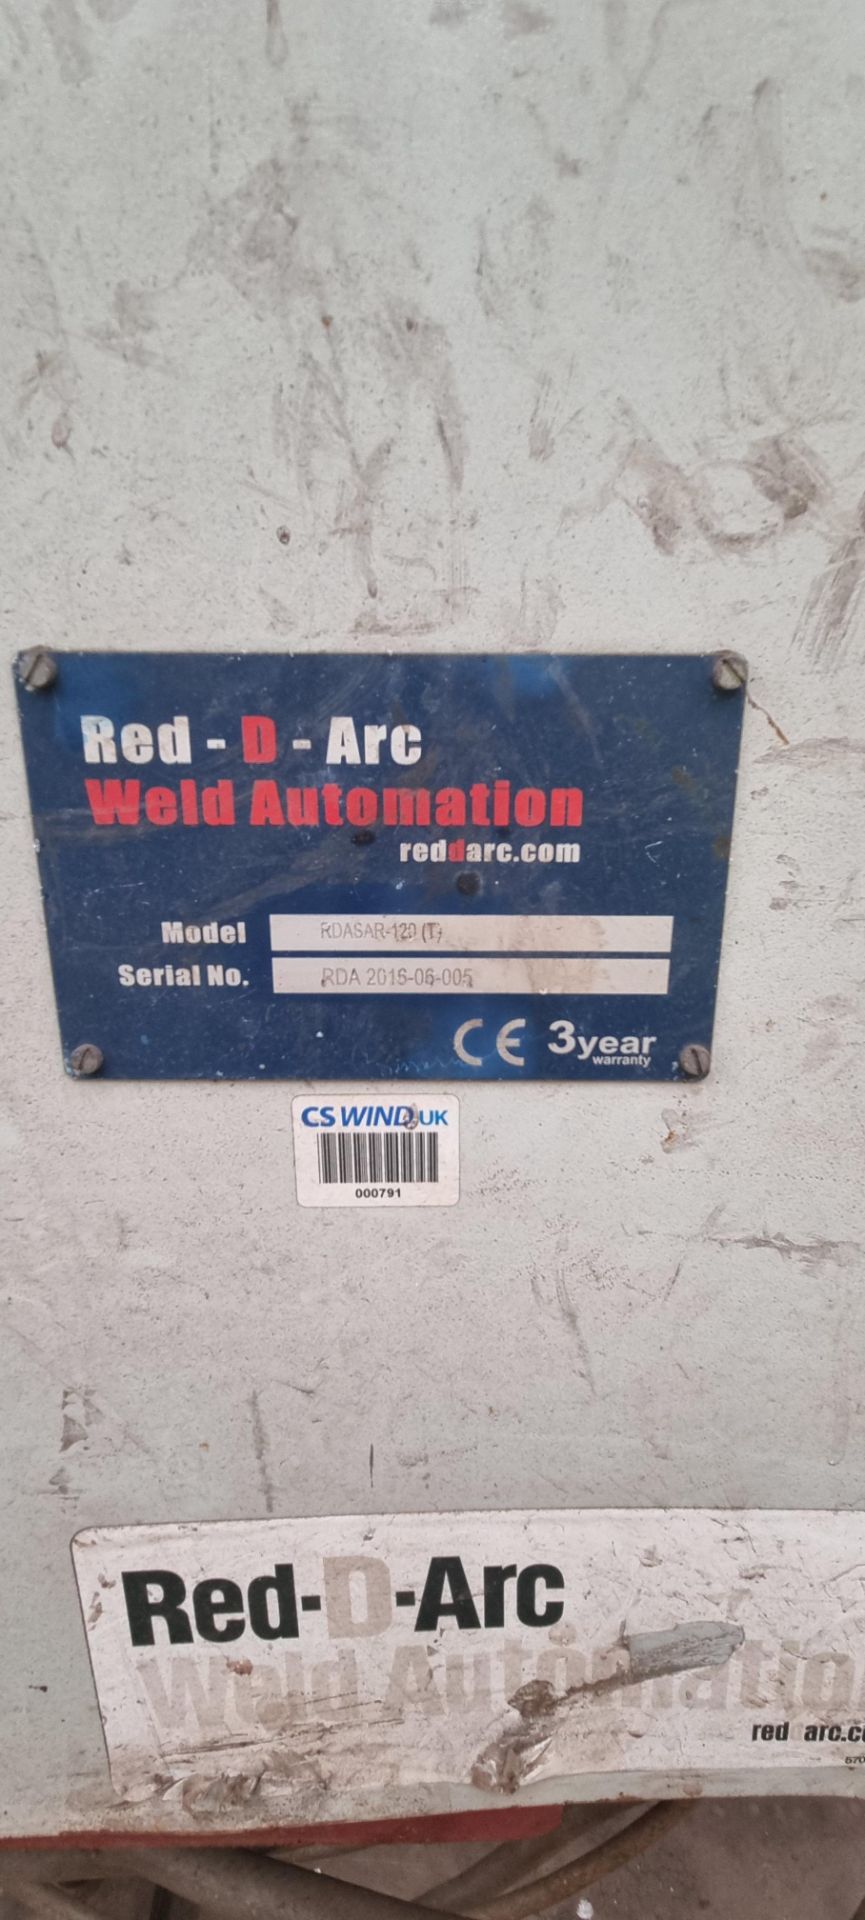 Red-D-Arc RDASAR-120T Powered Rotator with Idler. Serial number RDA 2016-06-005 - Image 5 of 9